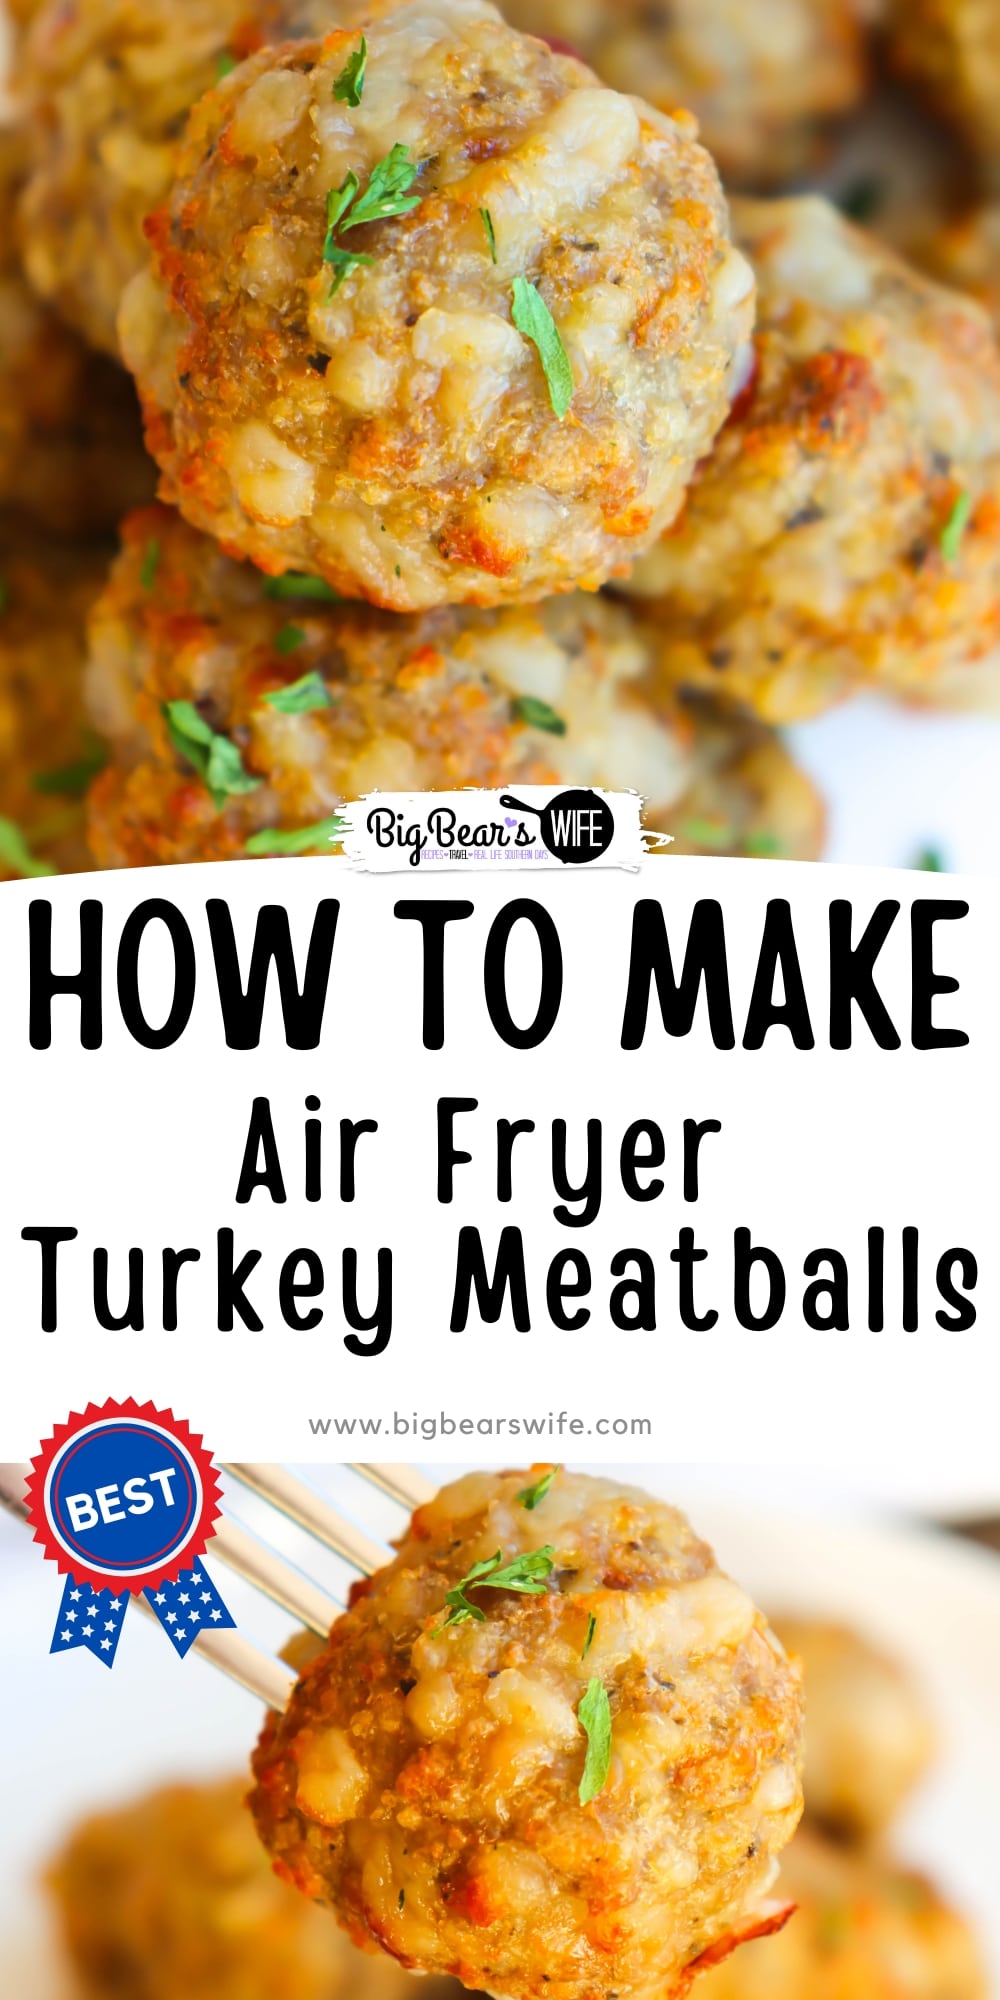 If you're looking for a healthy air fryer recipe, these Air Fryer Turkey Meatballs are for you! These are great for eating on their own, perfect for parties or great for spaghetti and meatballs!  via @bigbearswife